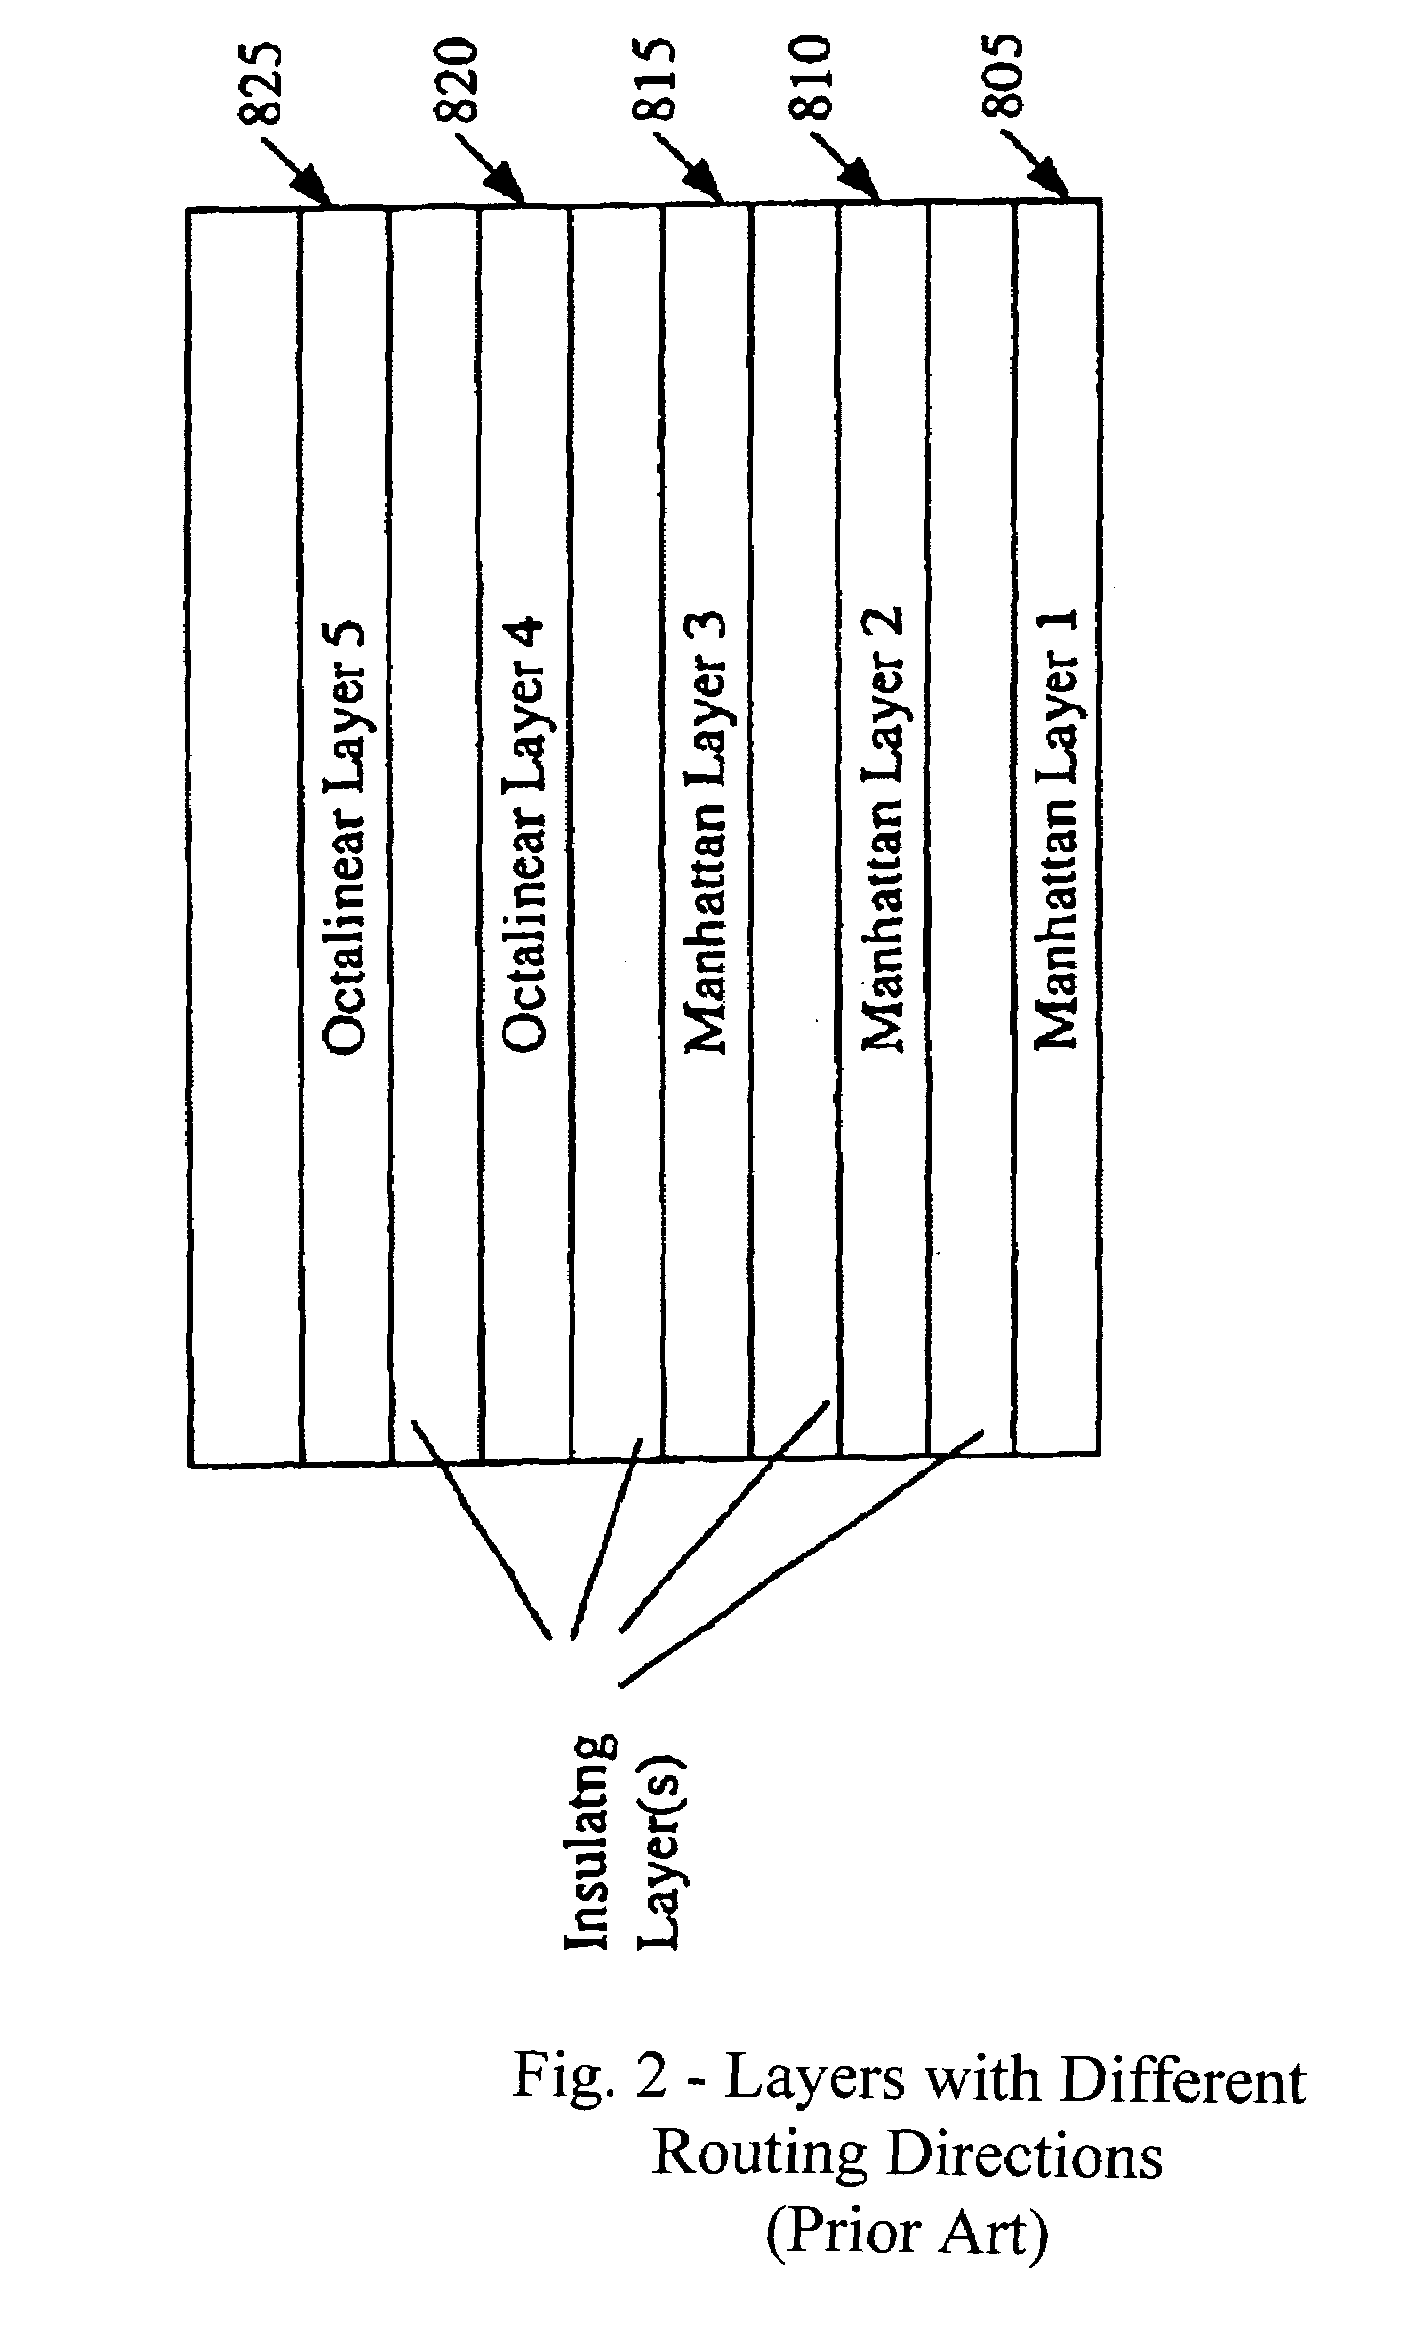 Method and system for implementing an analytical wirelength formulation for unavailability of routing directions